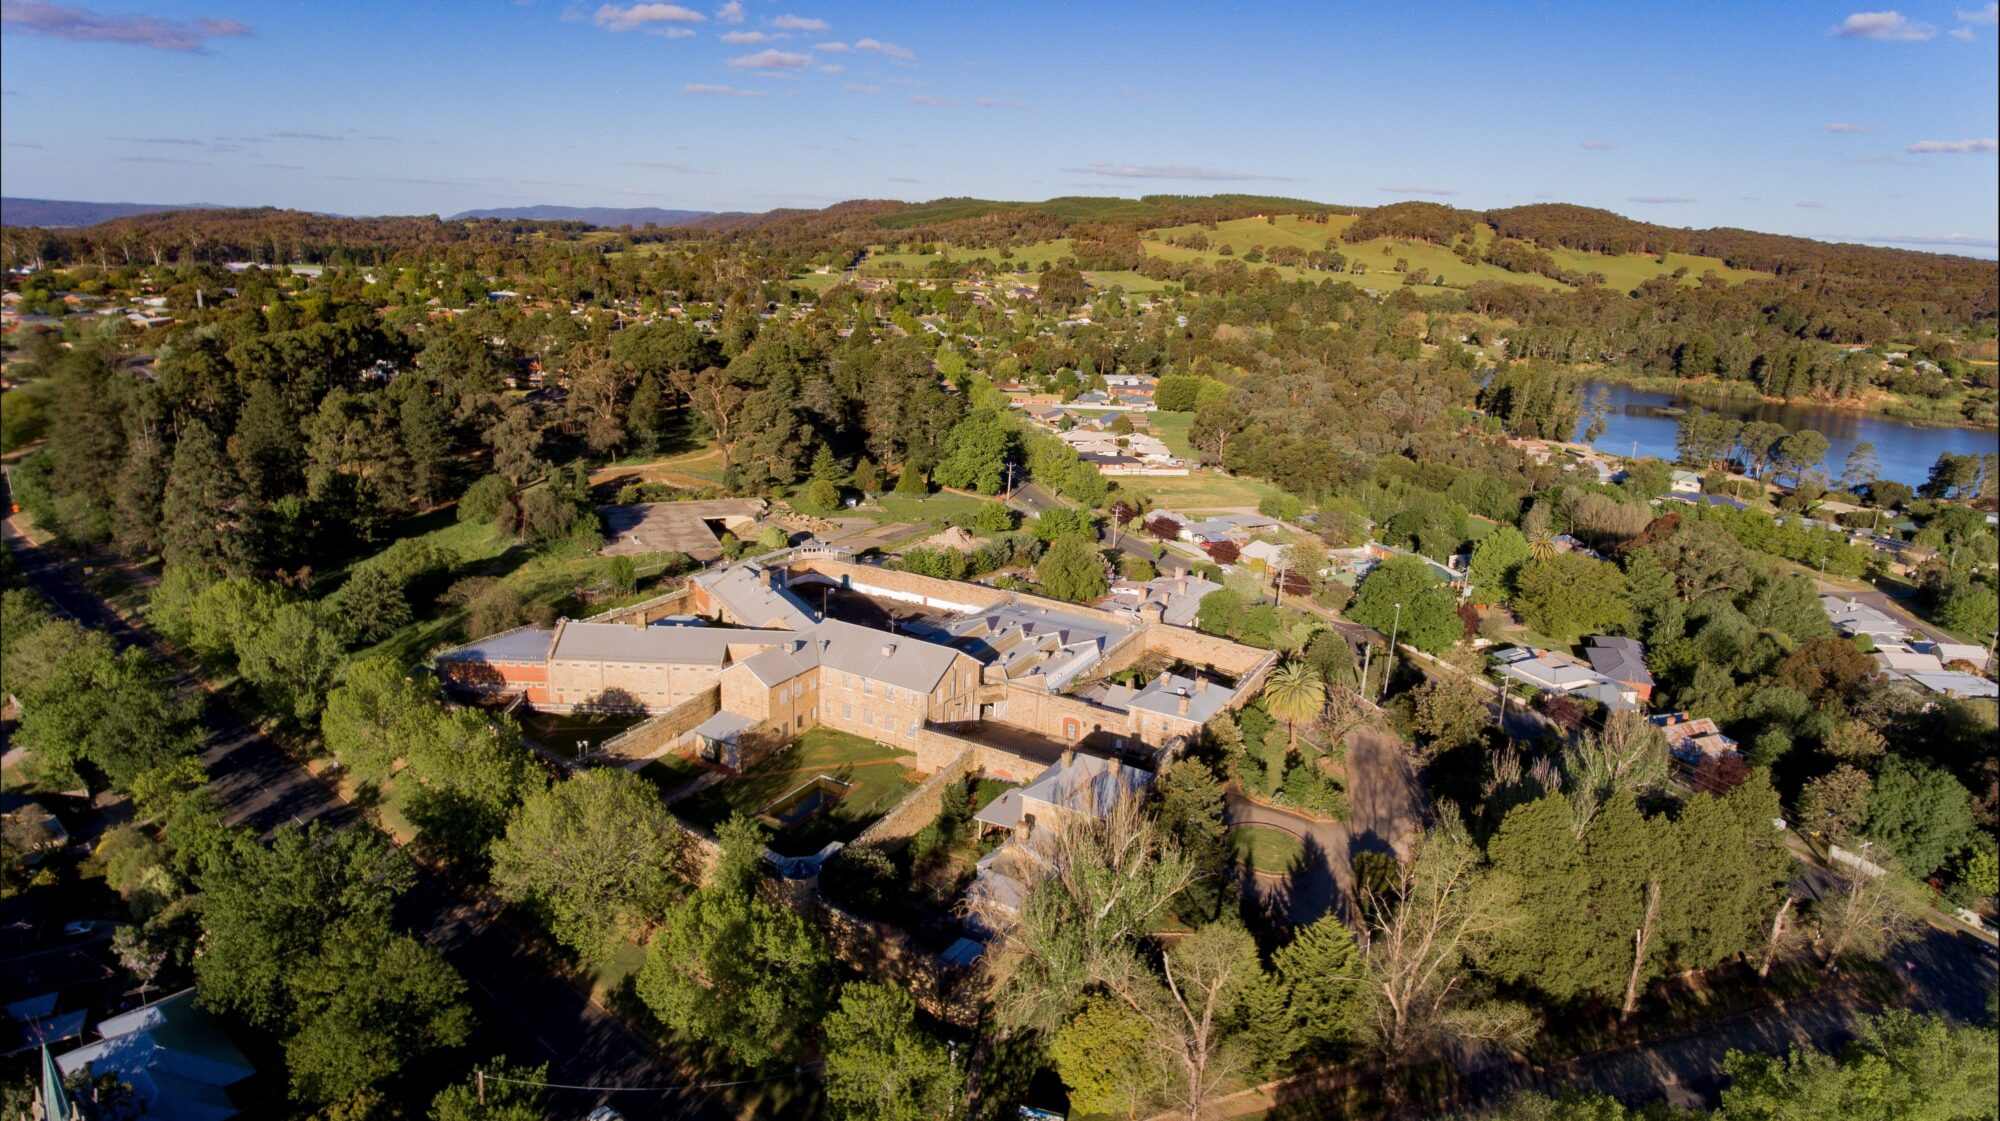 Aerial photograph of the Old Beechworth Gaol